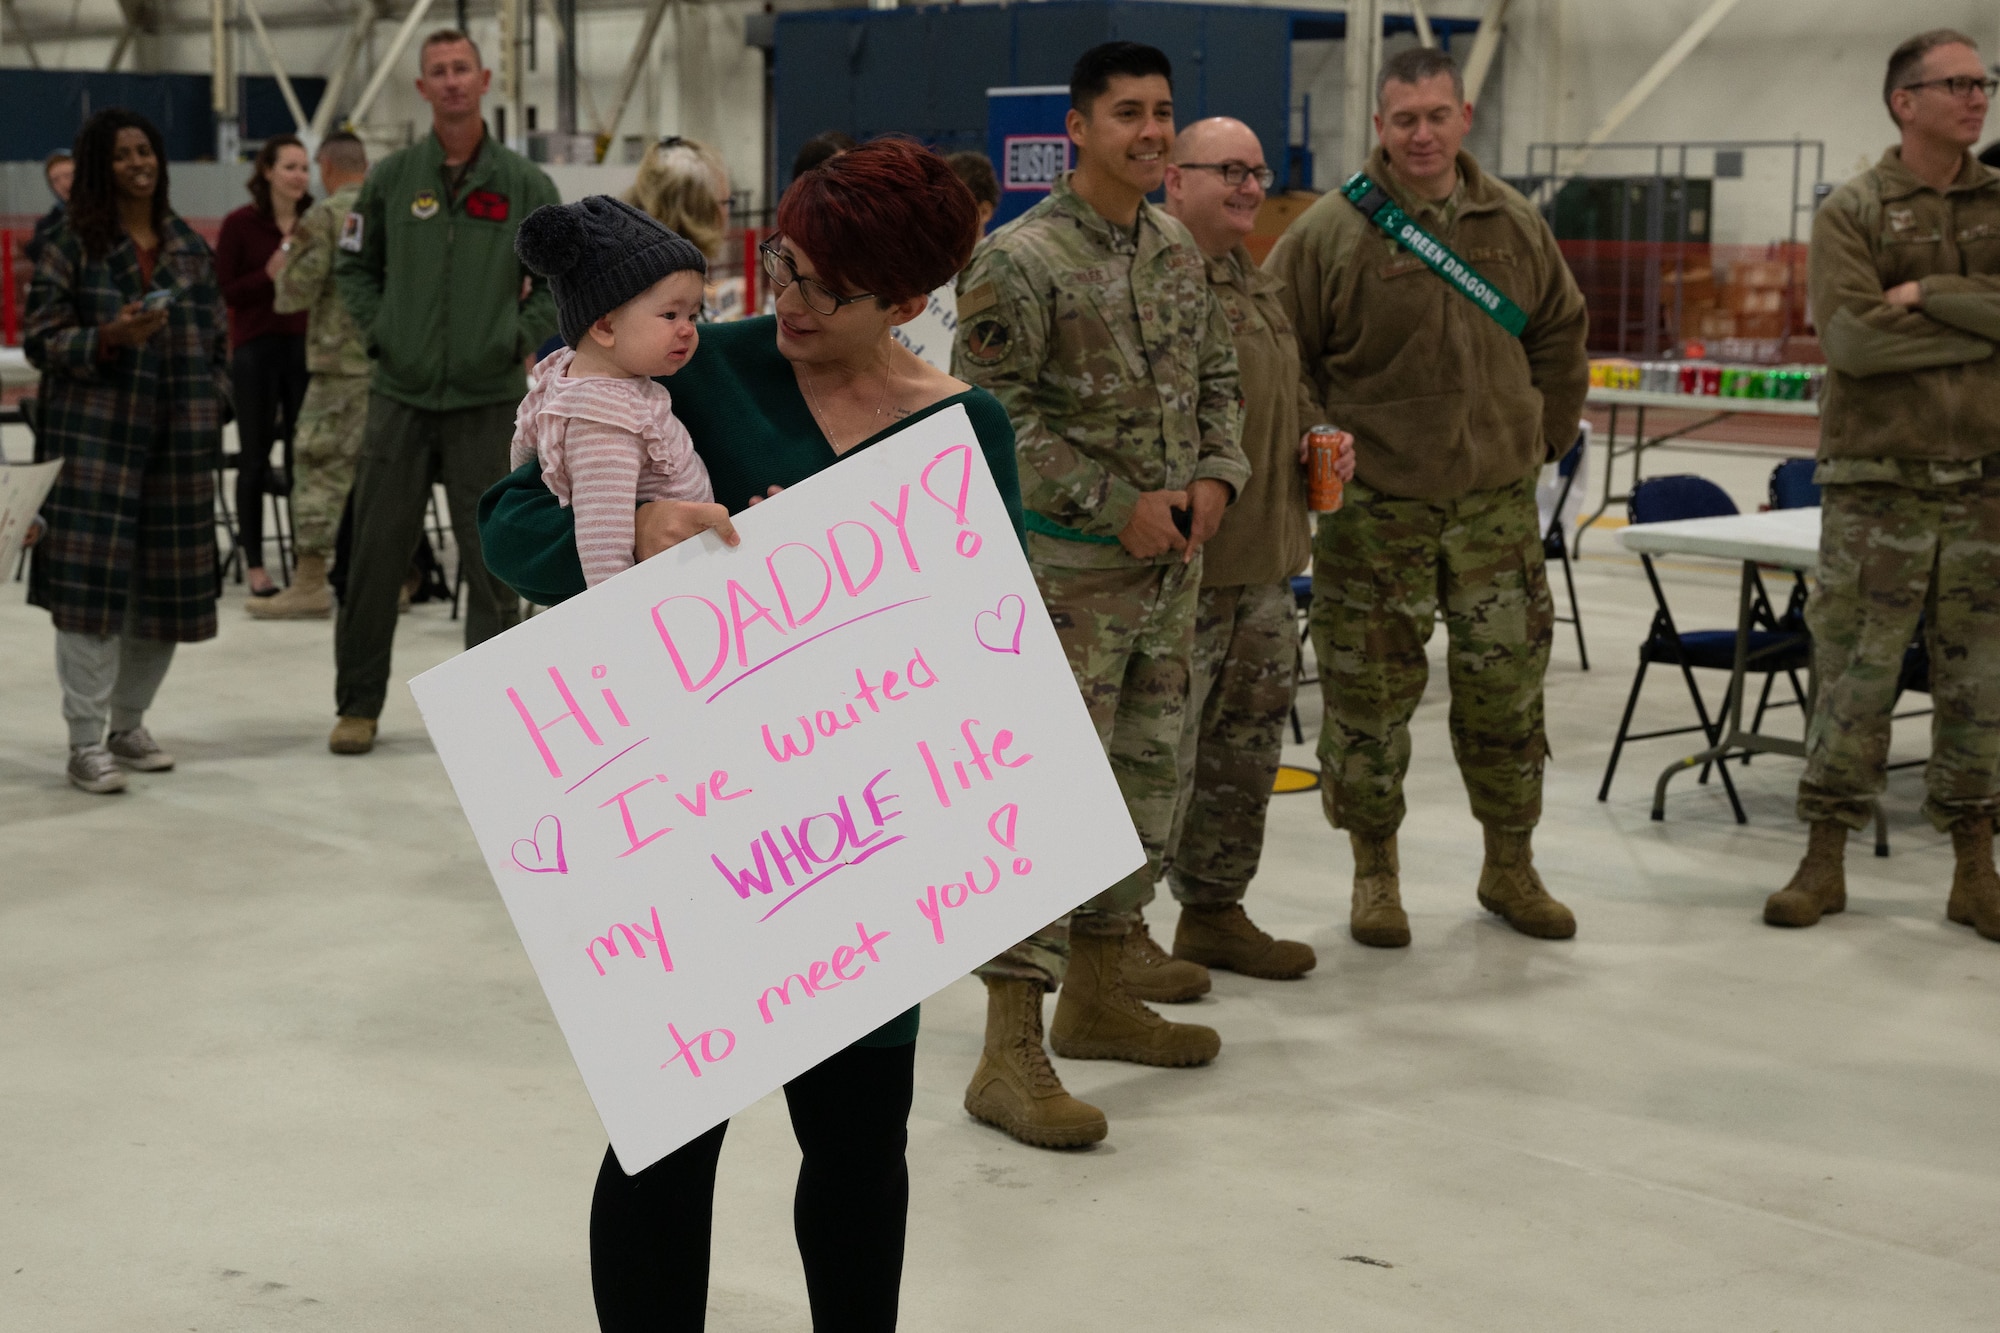 A family of a deployed 48th Fighter Wing Airman wait to welcome them home at Royal Air Force Lakenheath, England, after being away for eight months in an undisclosed location in Southwest Asia, Nov. 2, 2021. While conducting operations in support of Operation Inherent Resolve, the Panthers simultaneously flew their F-15E Strike Eagles in support of Operation Final Countdown and Operation Allies Welcome. (U.S. Air Force photo by Airman 1st Class Cedrique Oldaker)